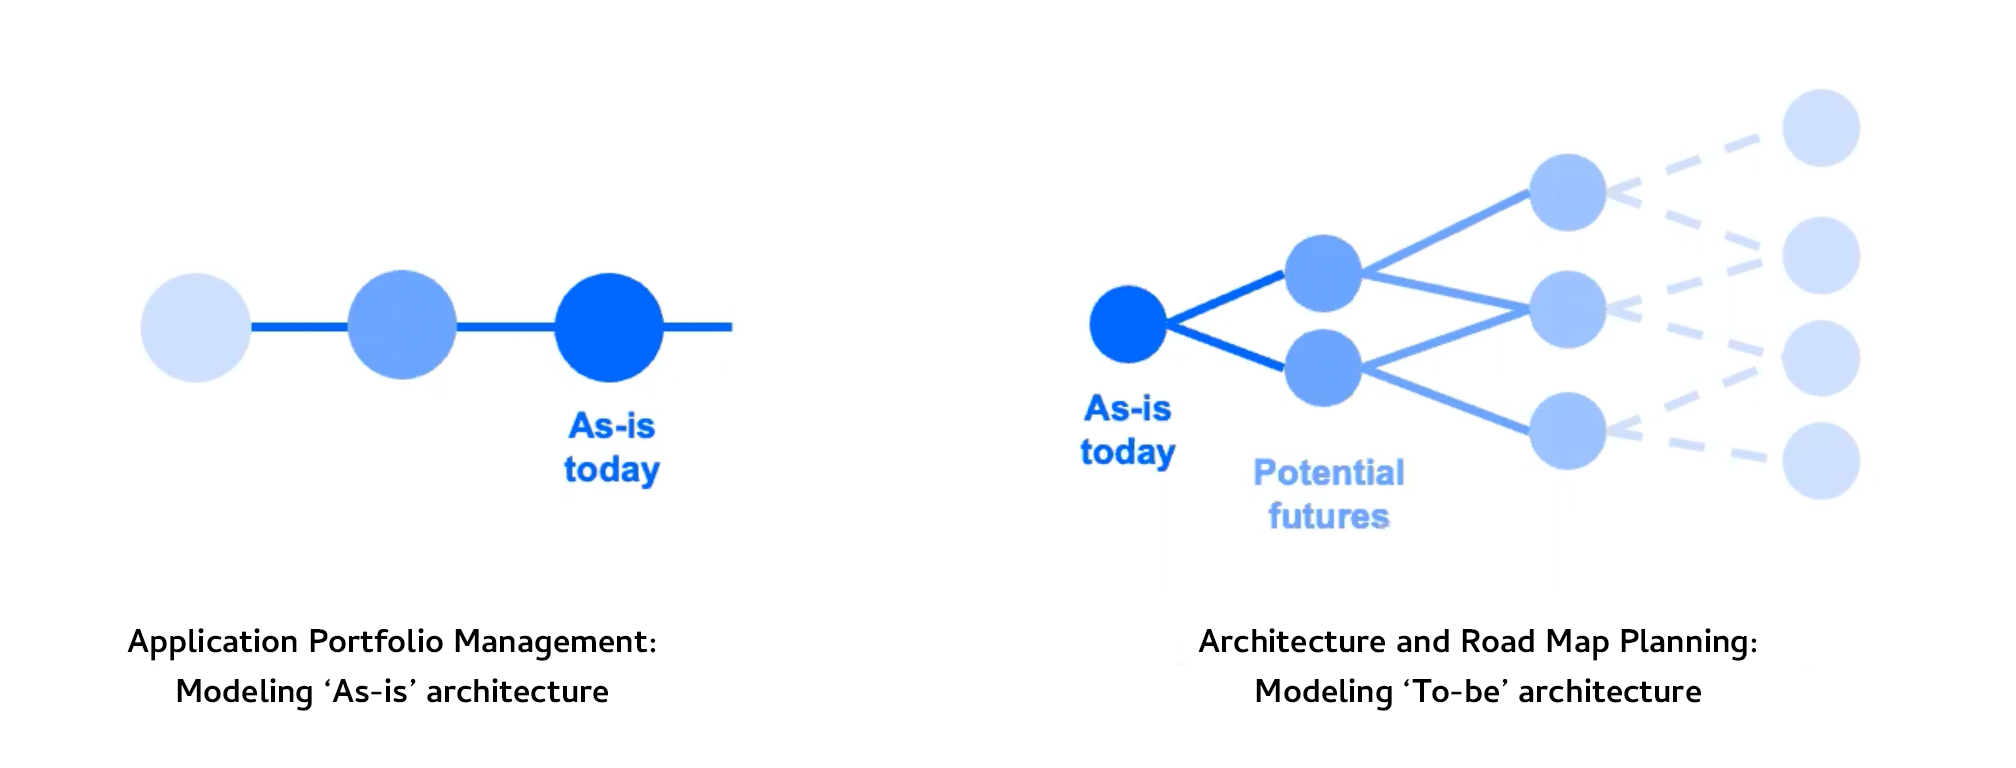 BTM: Modeling ‘To-be’ architecture